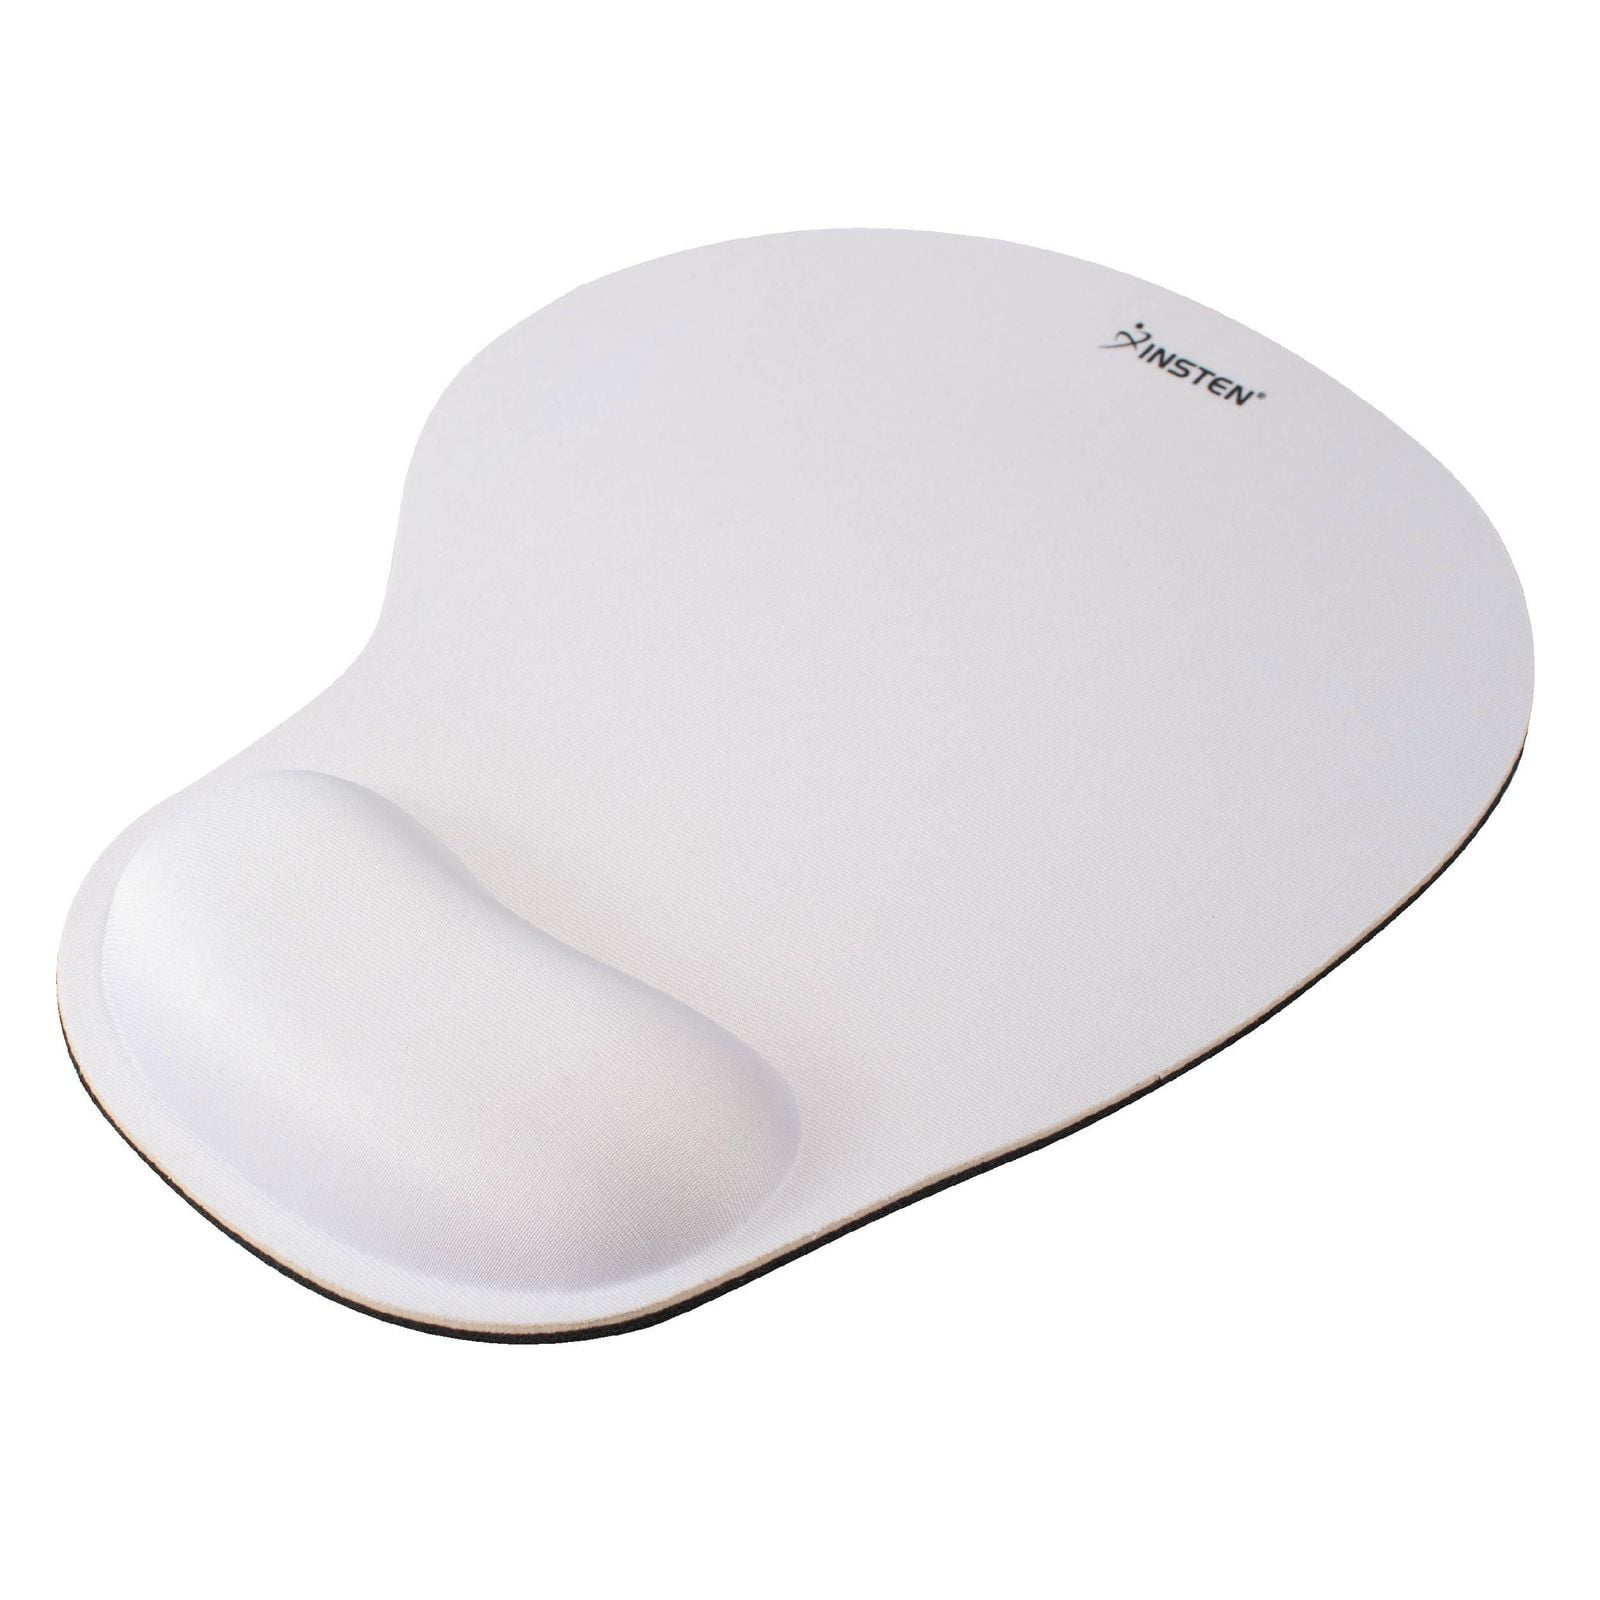 Insten Marble Mouse Pad With Wrist Support Rest, Ergonomic Support, Pain  Relief Memory Foam, Non-slip Rubber Base, Round, White : Target